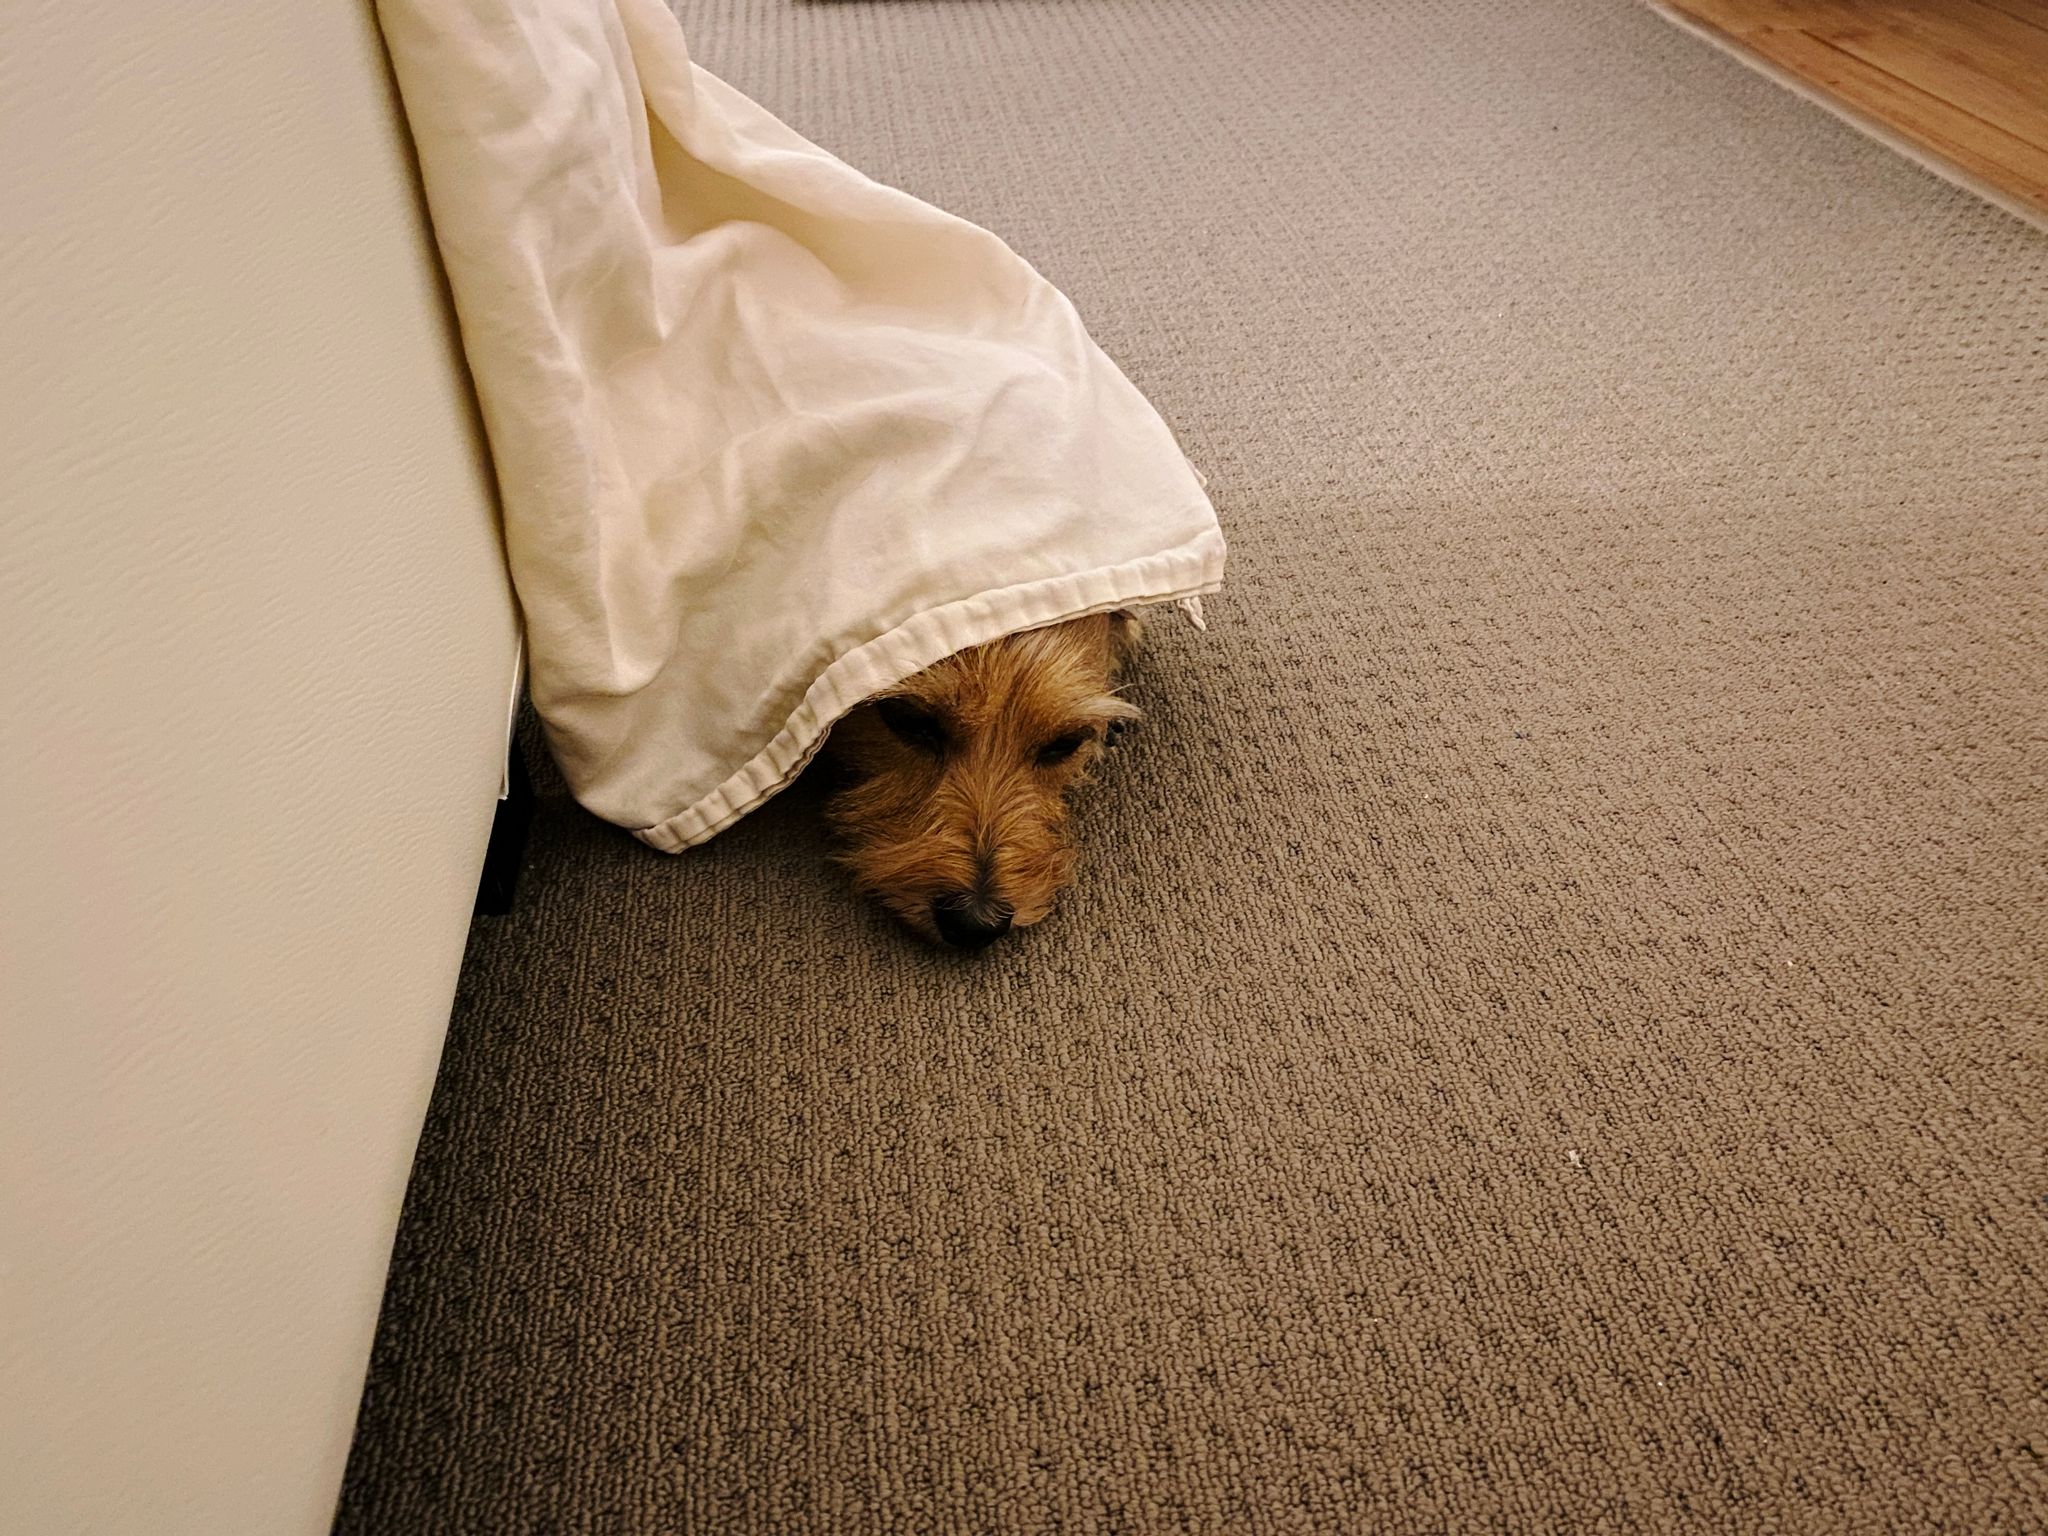 A photo of a small scruffy blonde dog's head poking out the bottom of a sheet that's dangling down from the end of a bed.